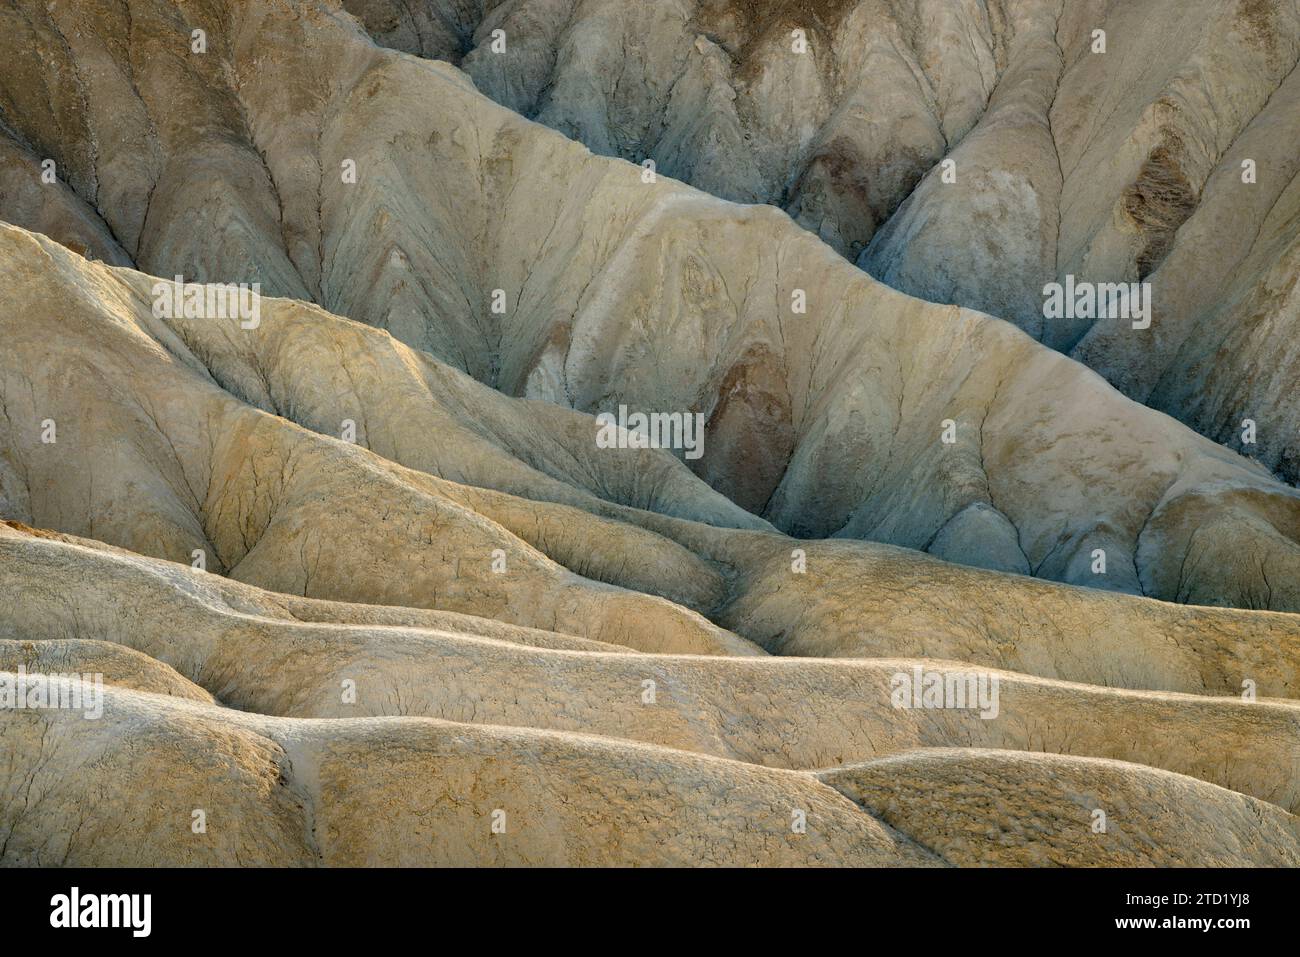 Siltstone badlands of the Furnace Creek Formation below Zabriskie Point in Death Valley National Park, California. Stock Photo